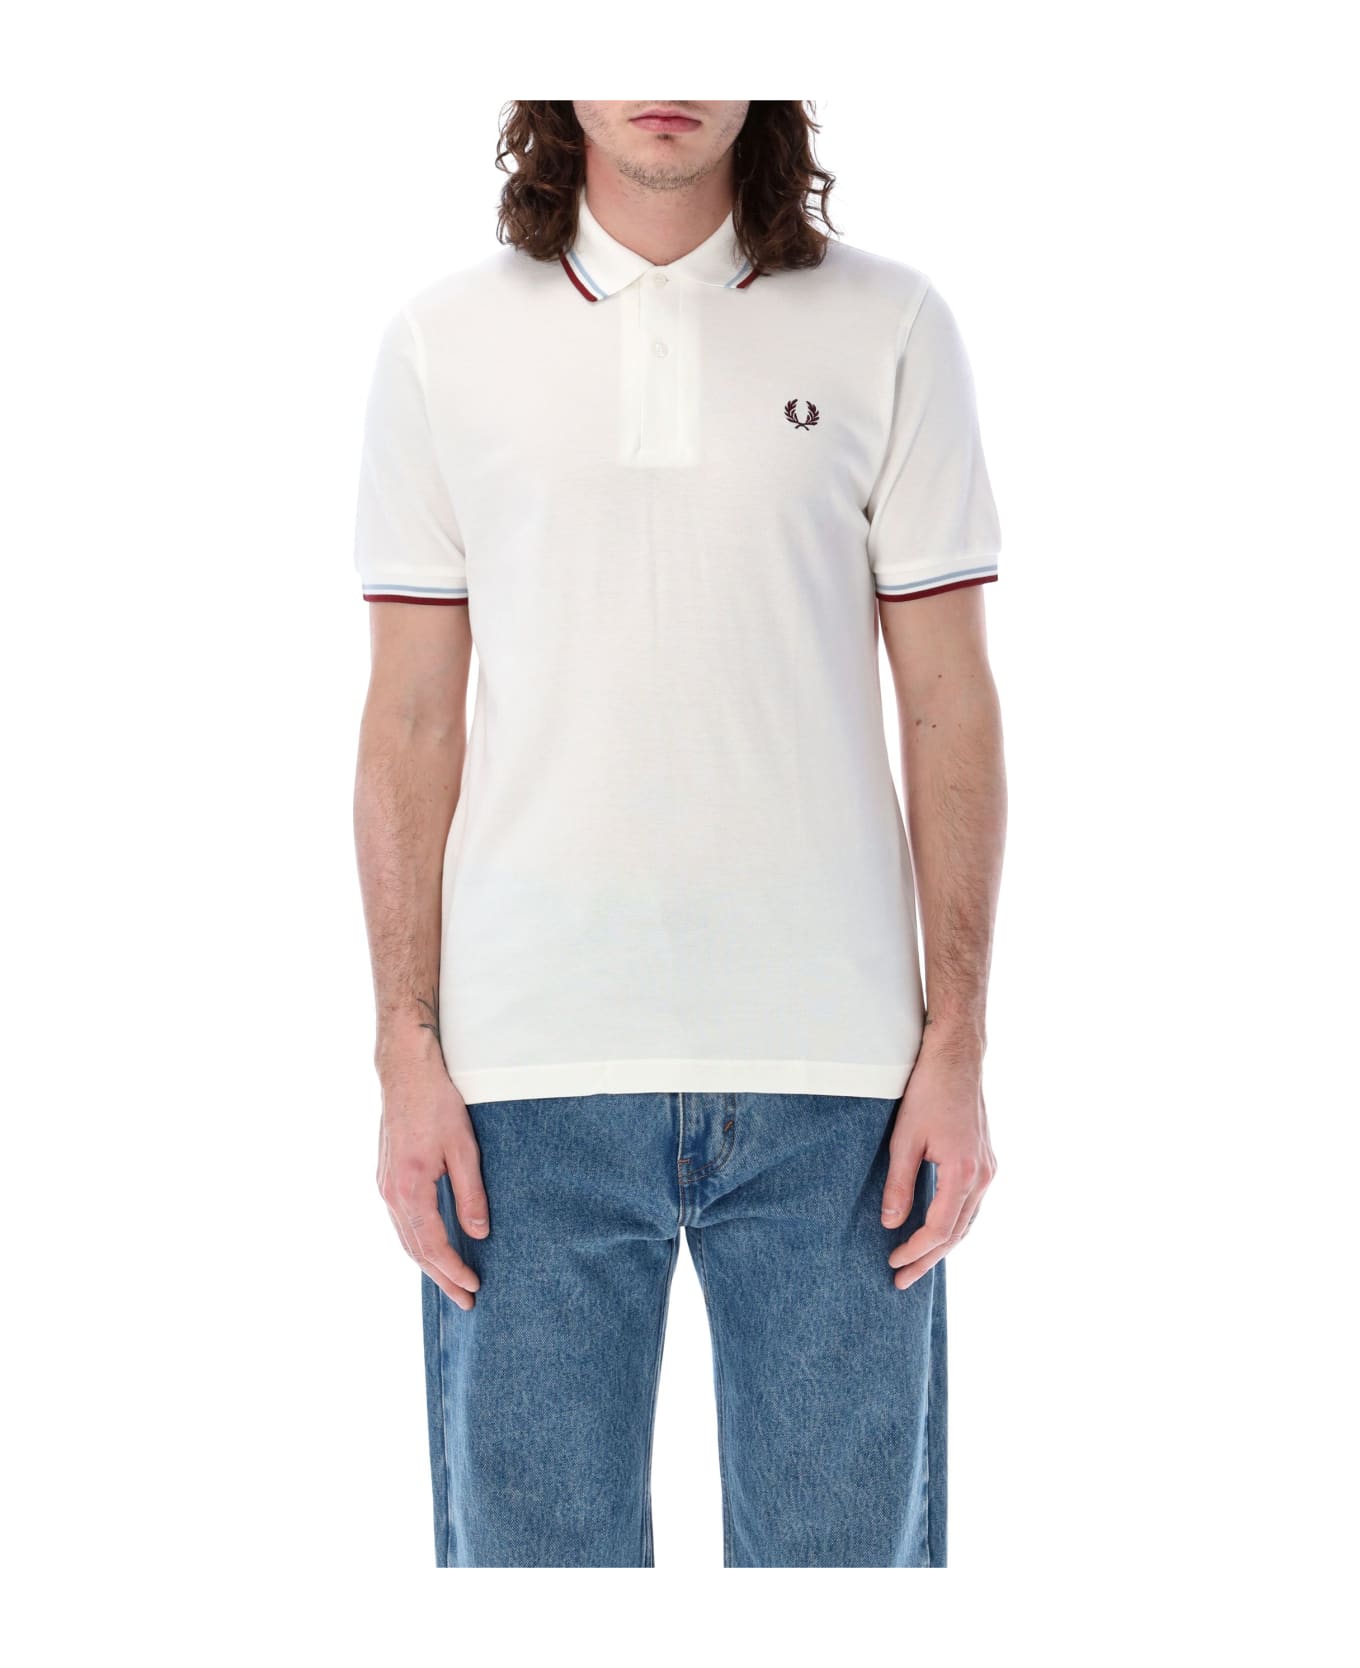 Fred Perry The Original Twin Tipped Piqué Polo Shirt - WHITE MAROON ポロシャツ